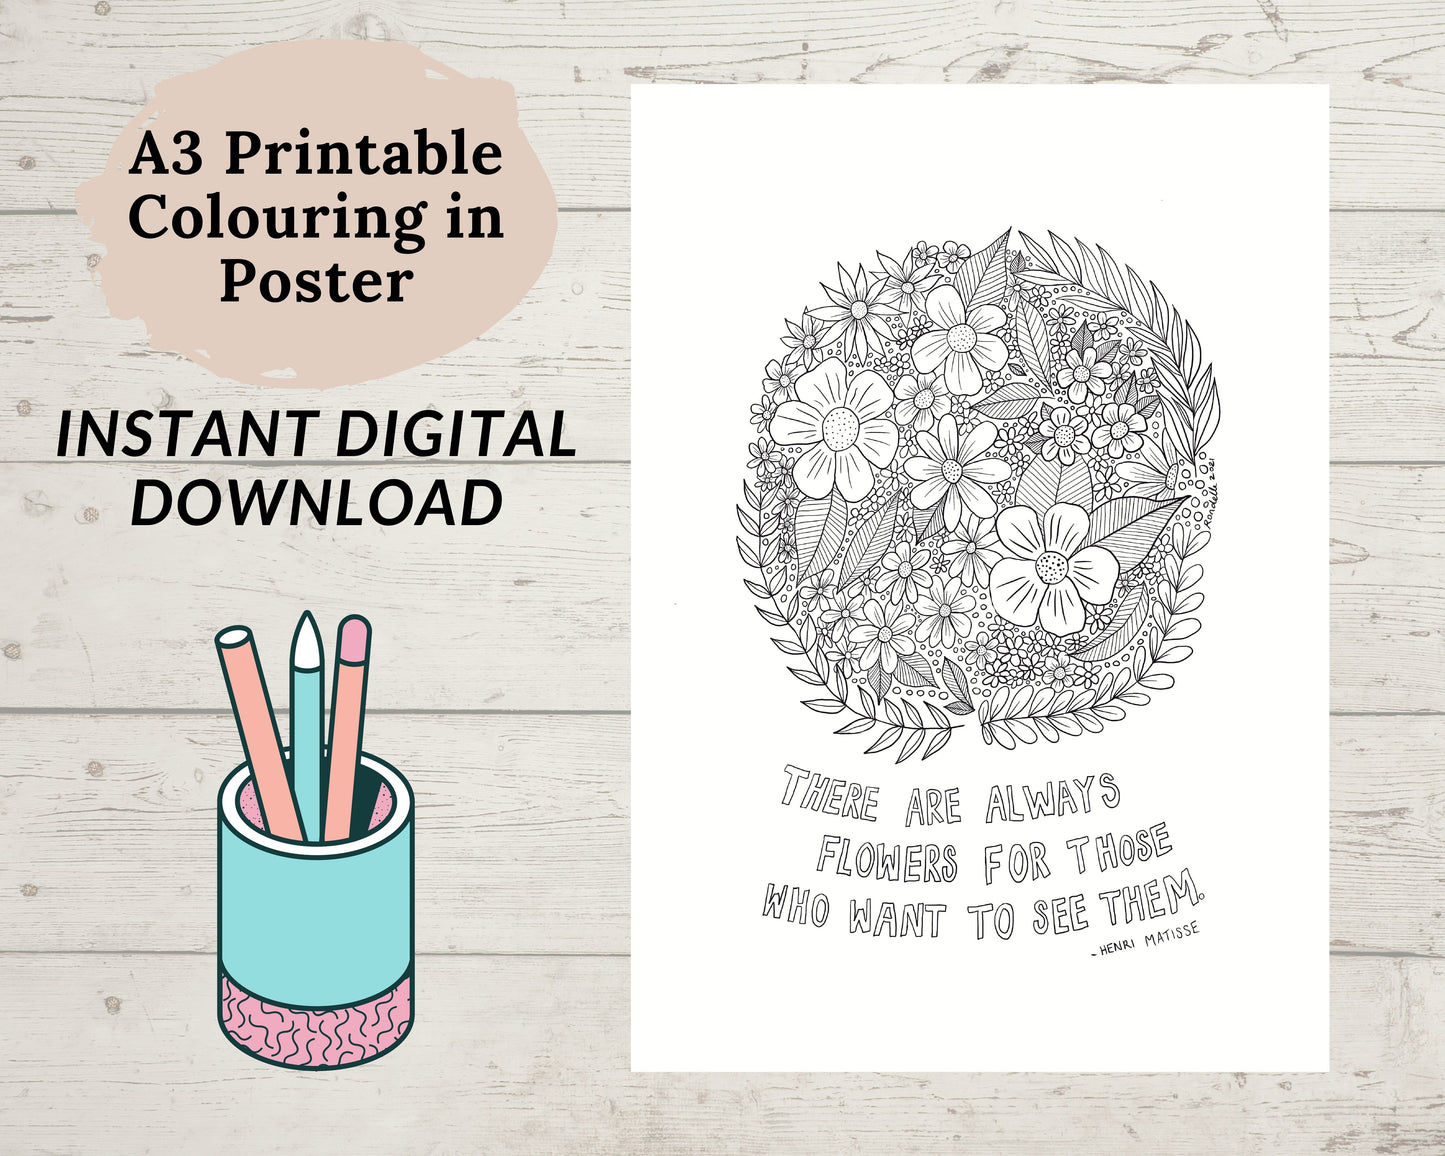 Colouring In Sheet / Instant Digital Download A3 Printable Poster / Henri Matisse Quote